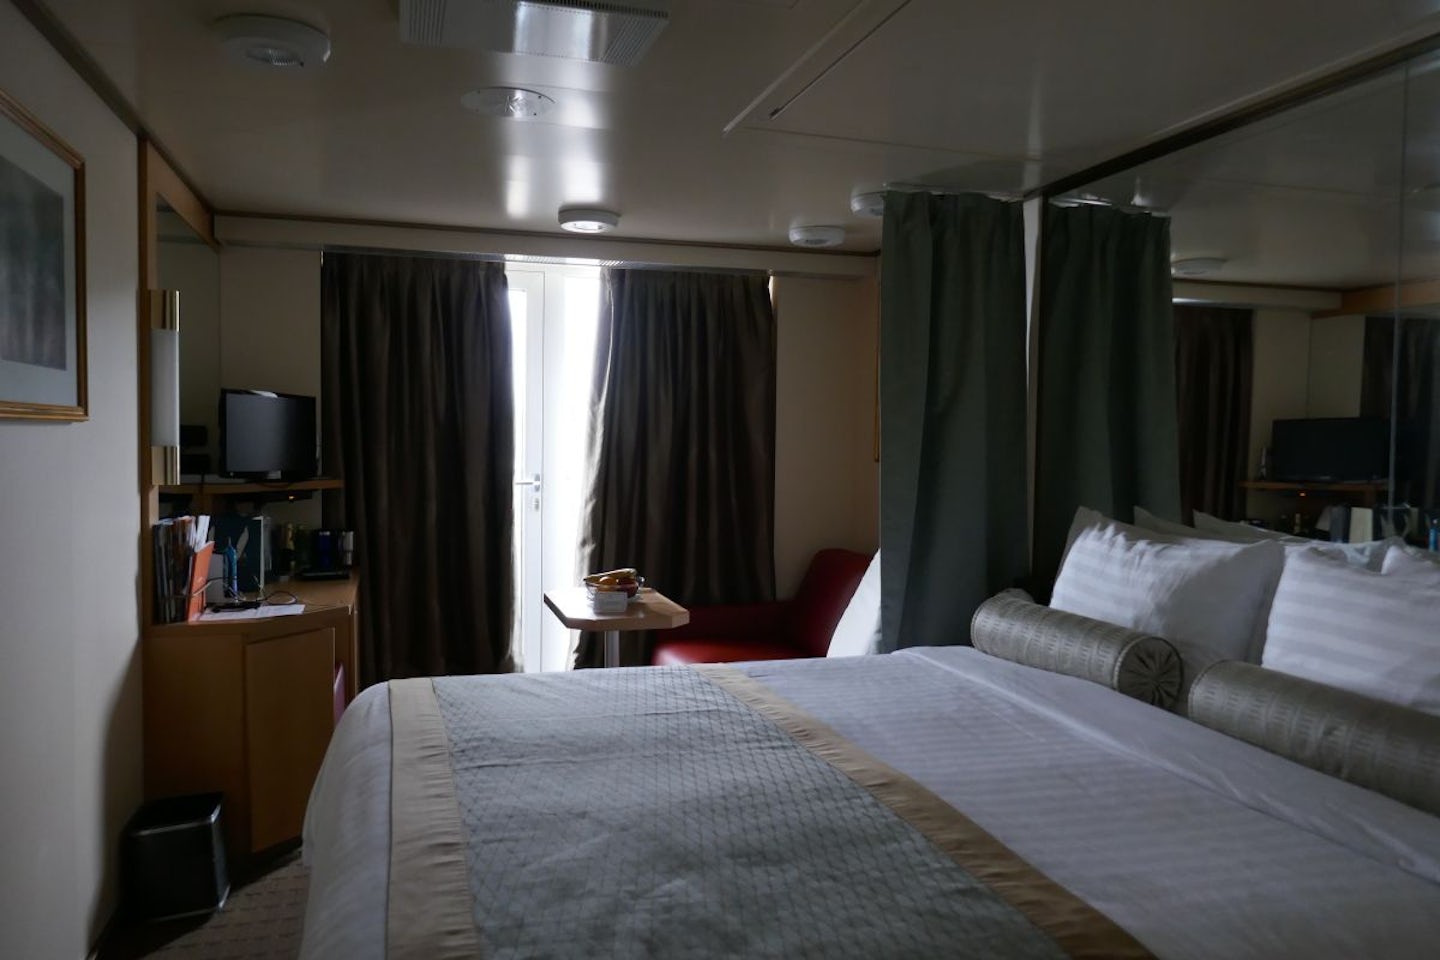 Our cabin on Deck 10